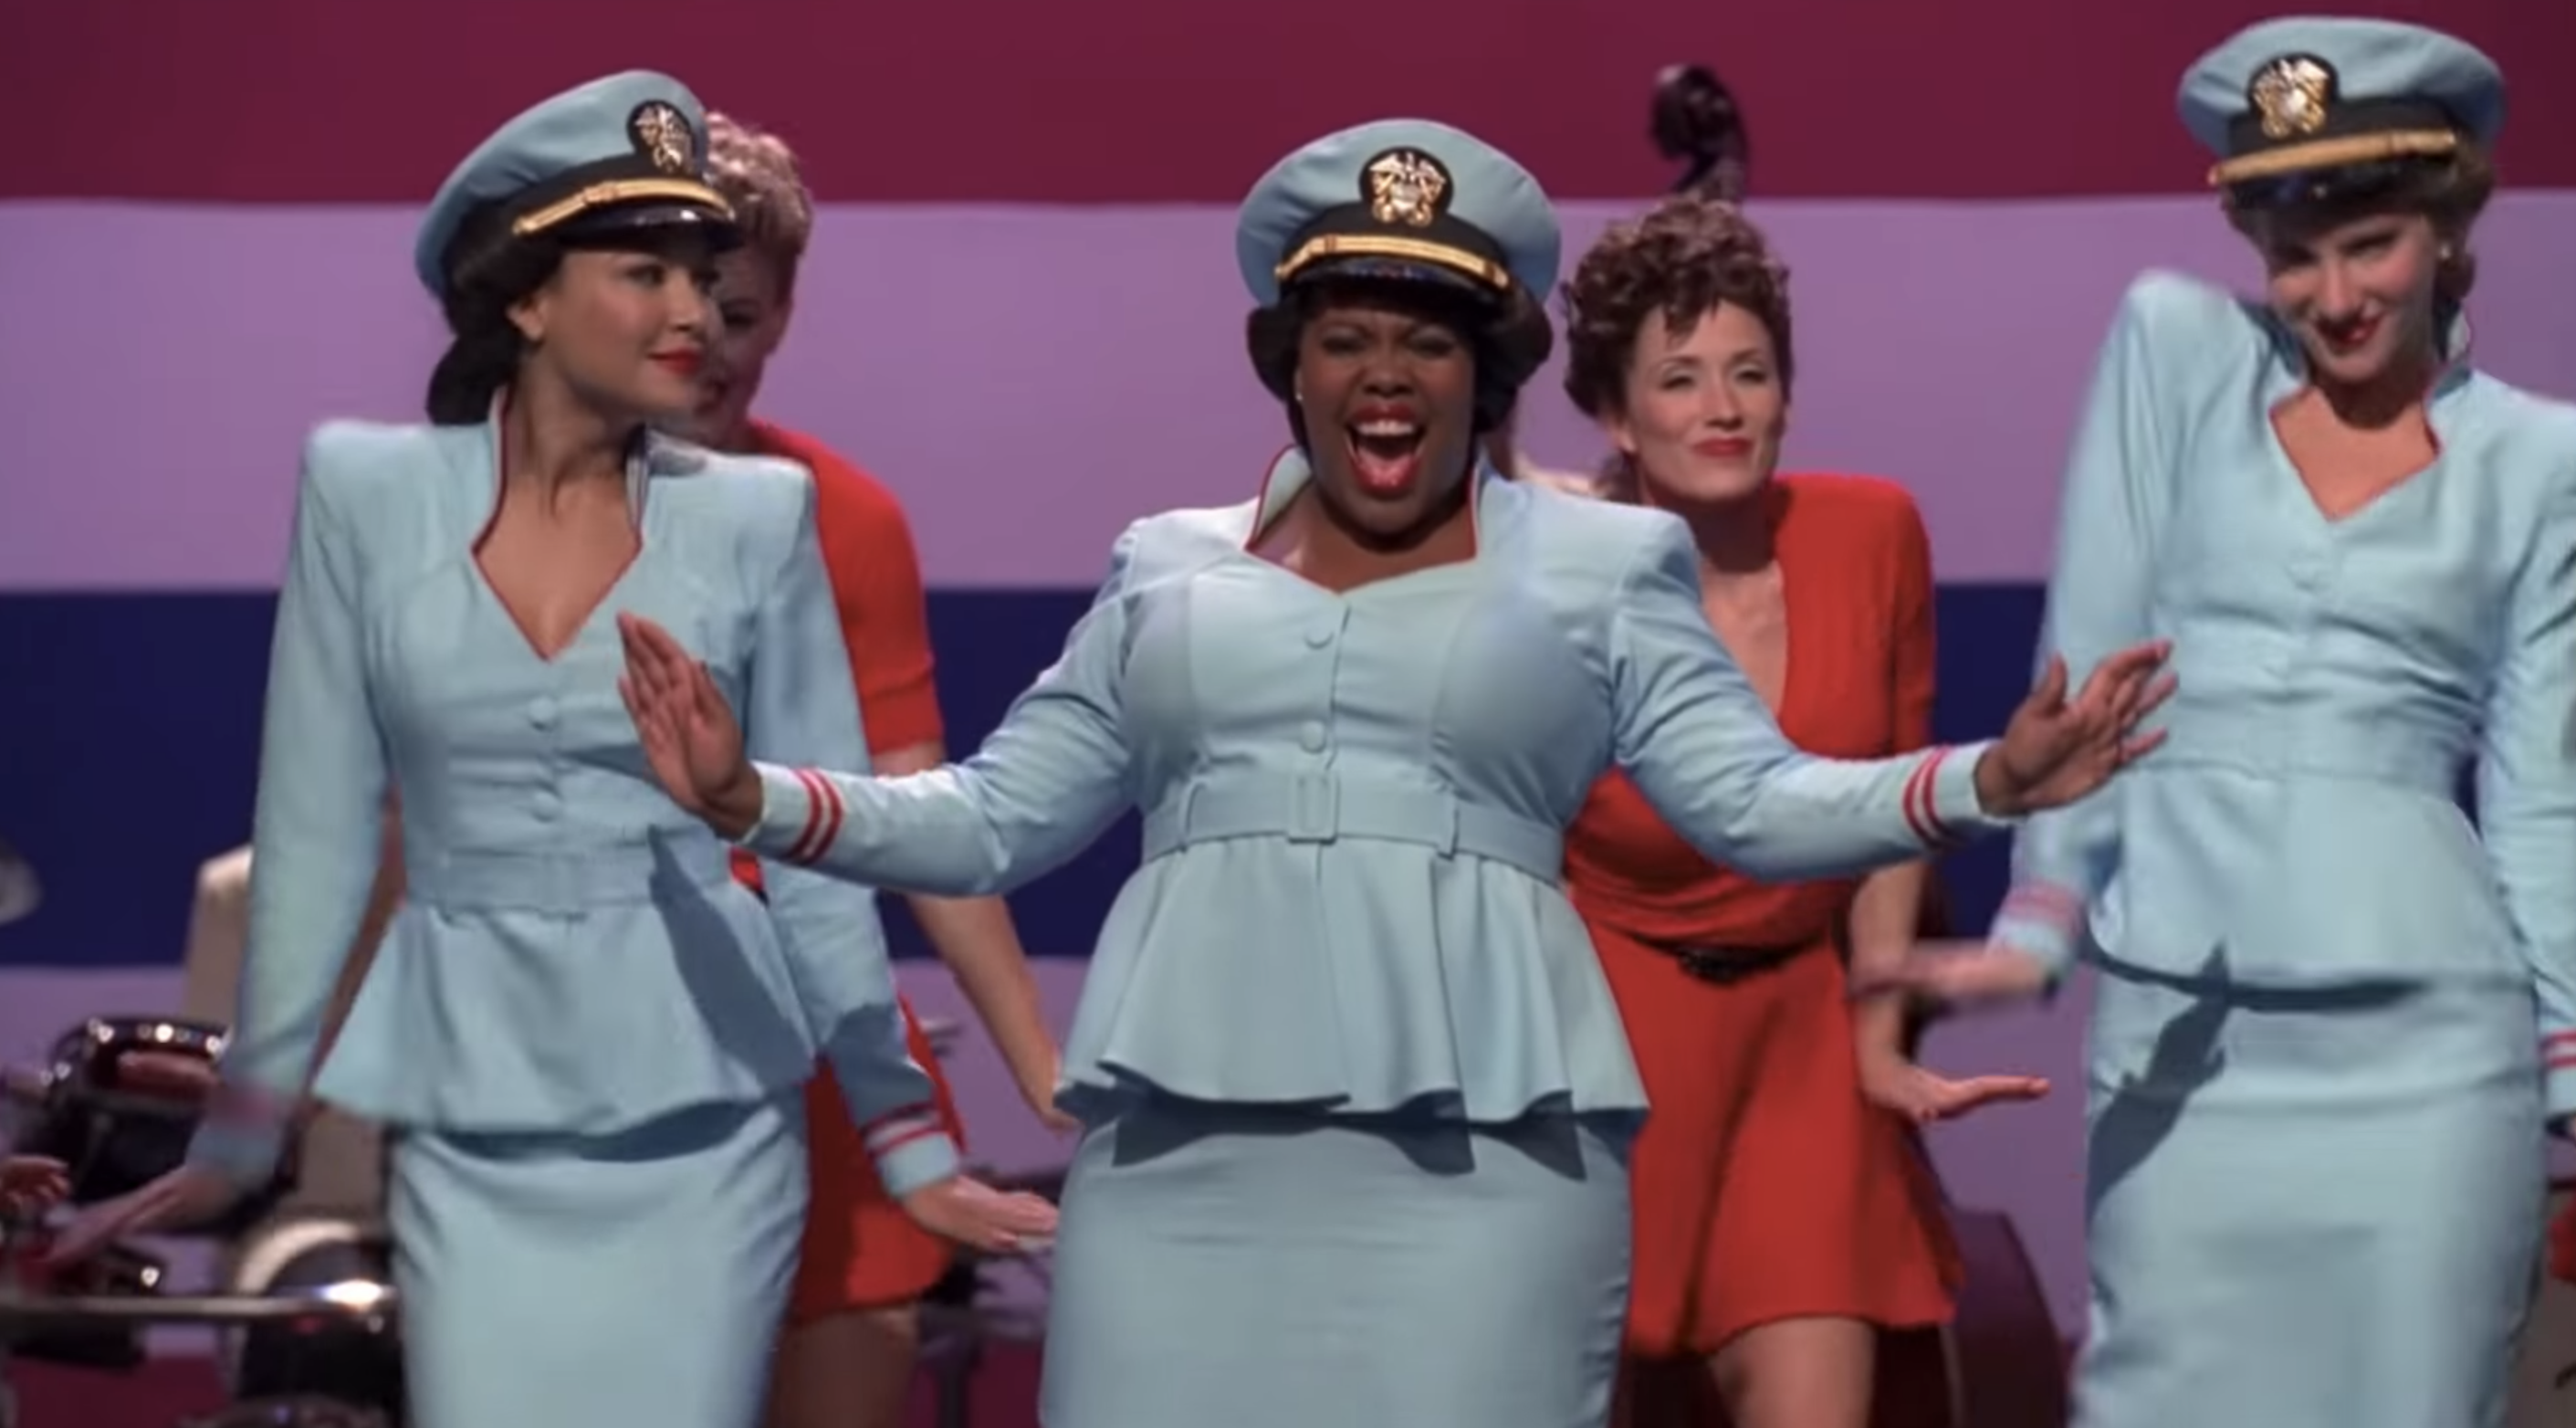 Mercedes, Santana, and Brittany wearing matching sailor costumes and singing on stage